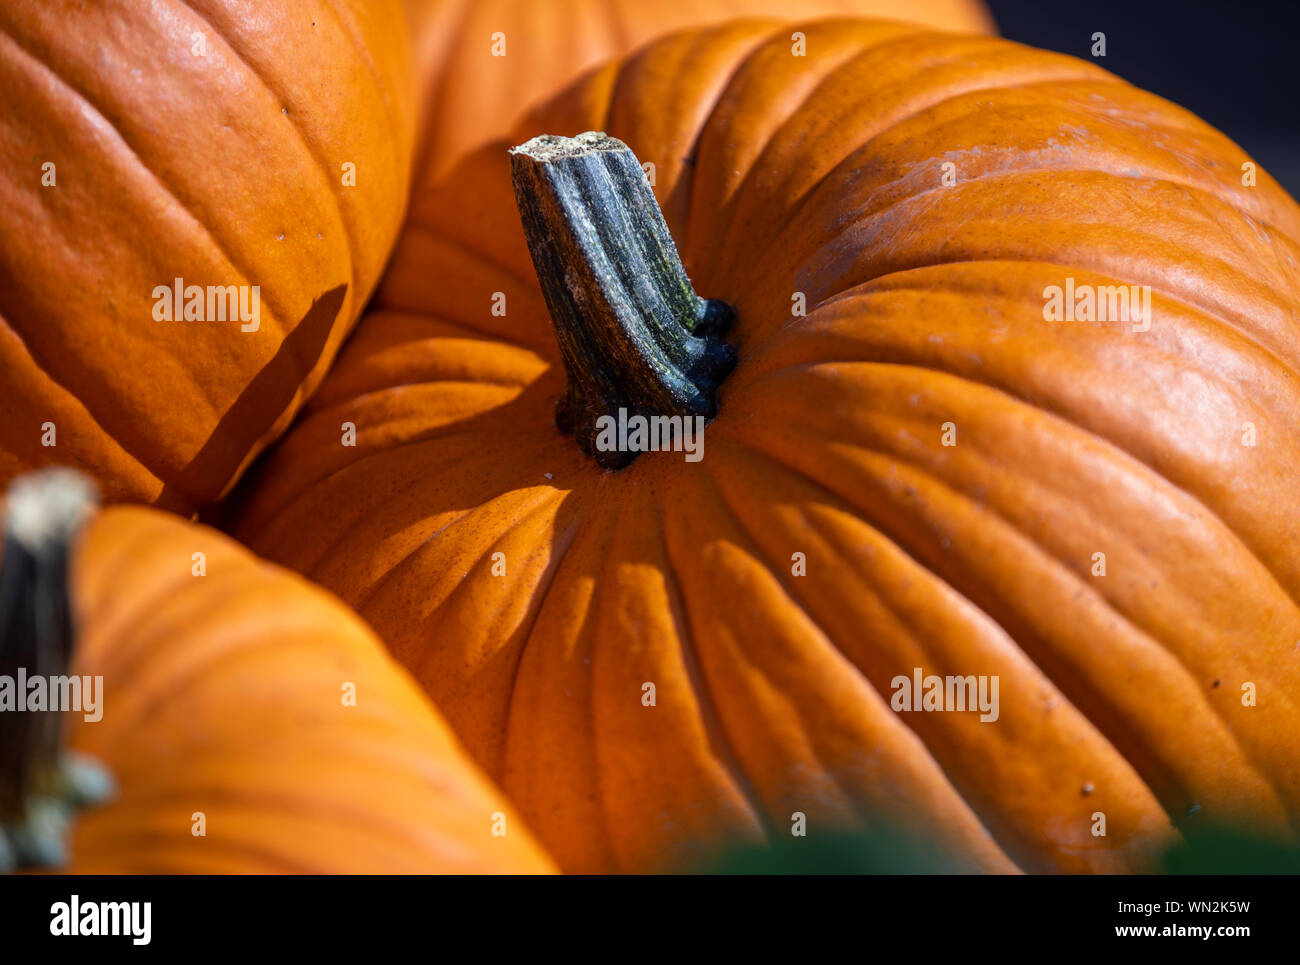 05 September 2019, Mecklenburg-Western Pomerania, Rövershagen: Large pumpkins lie on the market square in Karl's adventure village. The pumpkin season officially starts here at the weekend. Four giant pumpkin figures on the theme 'Olympic Games' have already been set up. The figures have a size of up to 5 meters and consist of hundreds of pumpkins. Photo: Jens Büttner/dpa-Zentralbild/dpa Stock Photo